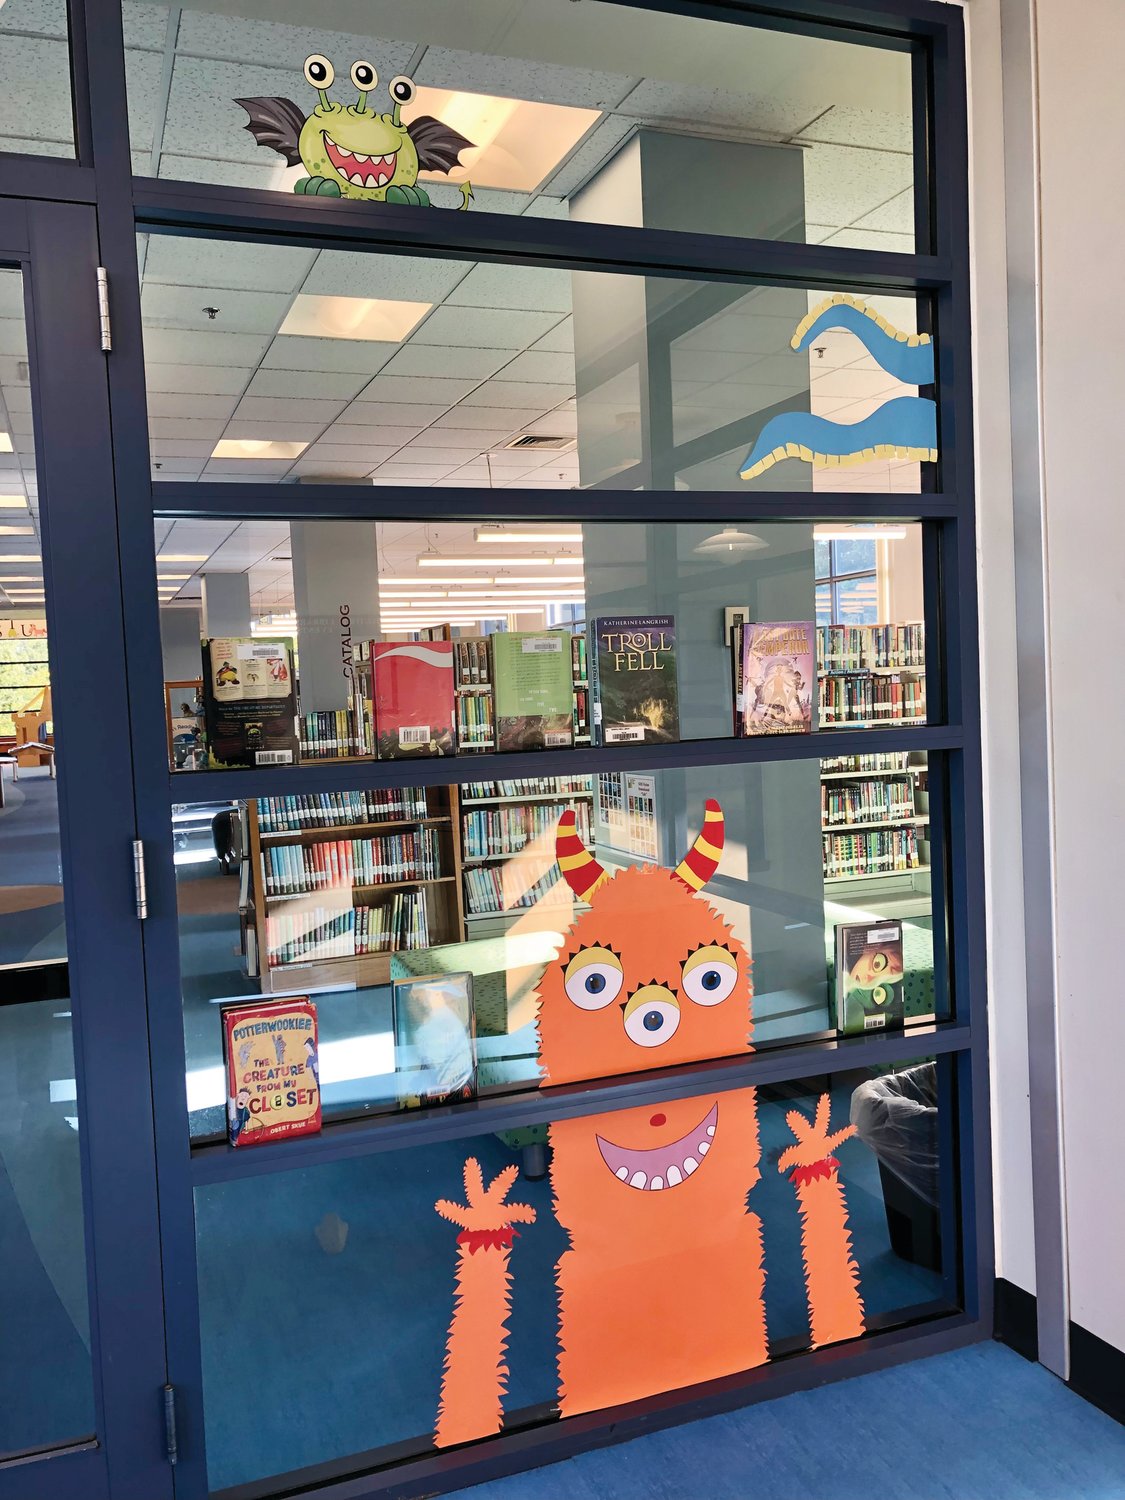 Friendly monsters of different colors, shapes, and sizes offer their welcome to the children’s department at the Warwick Library.